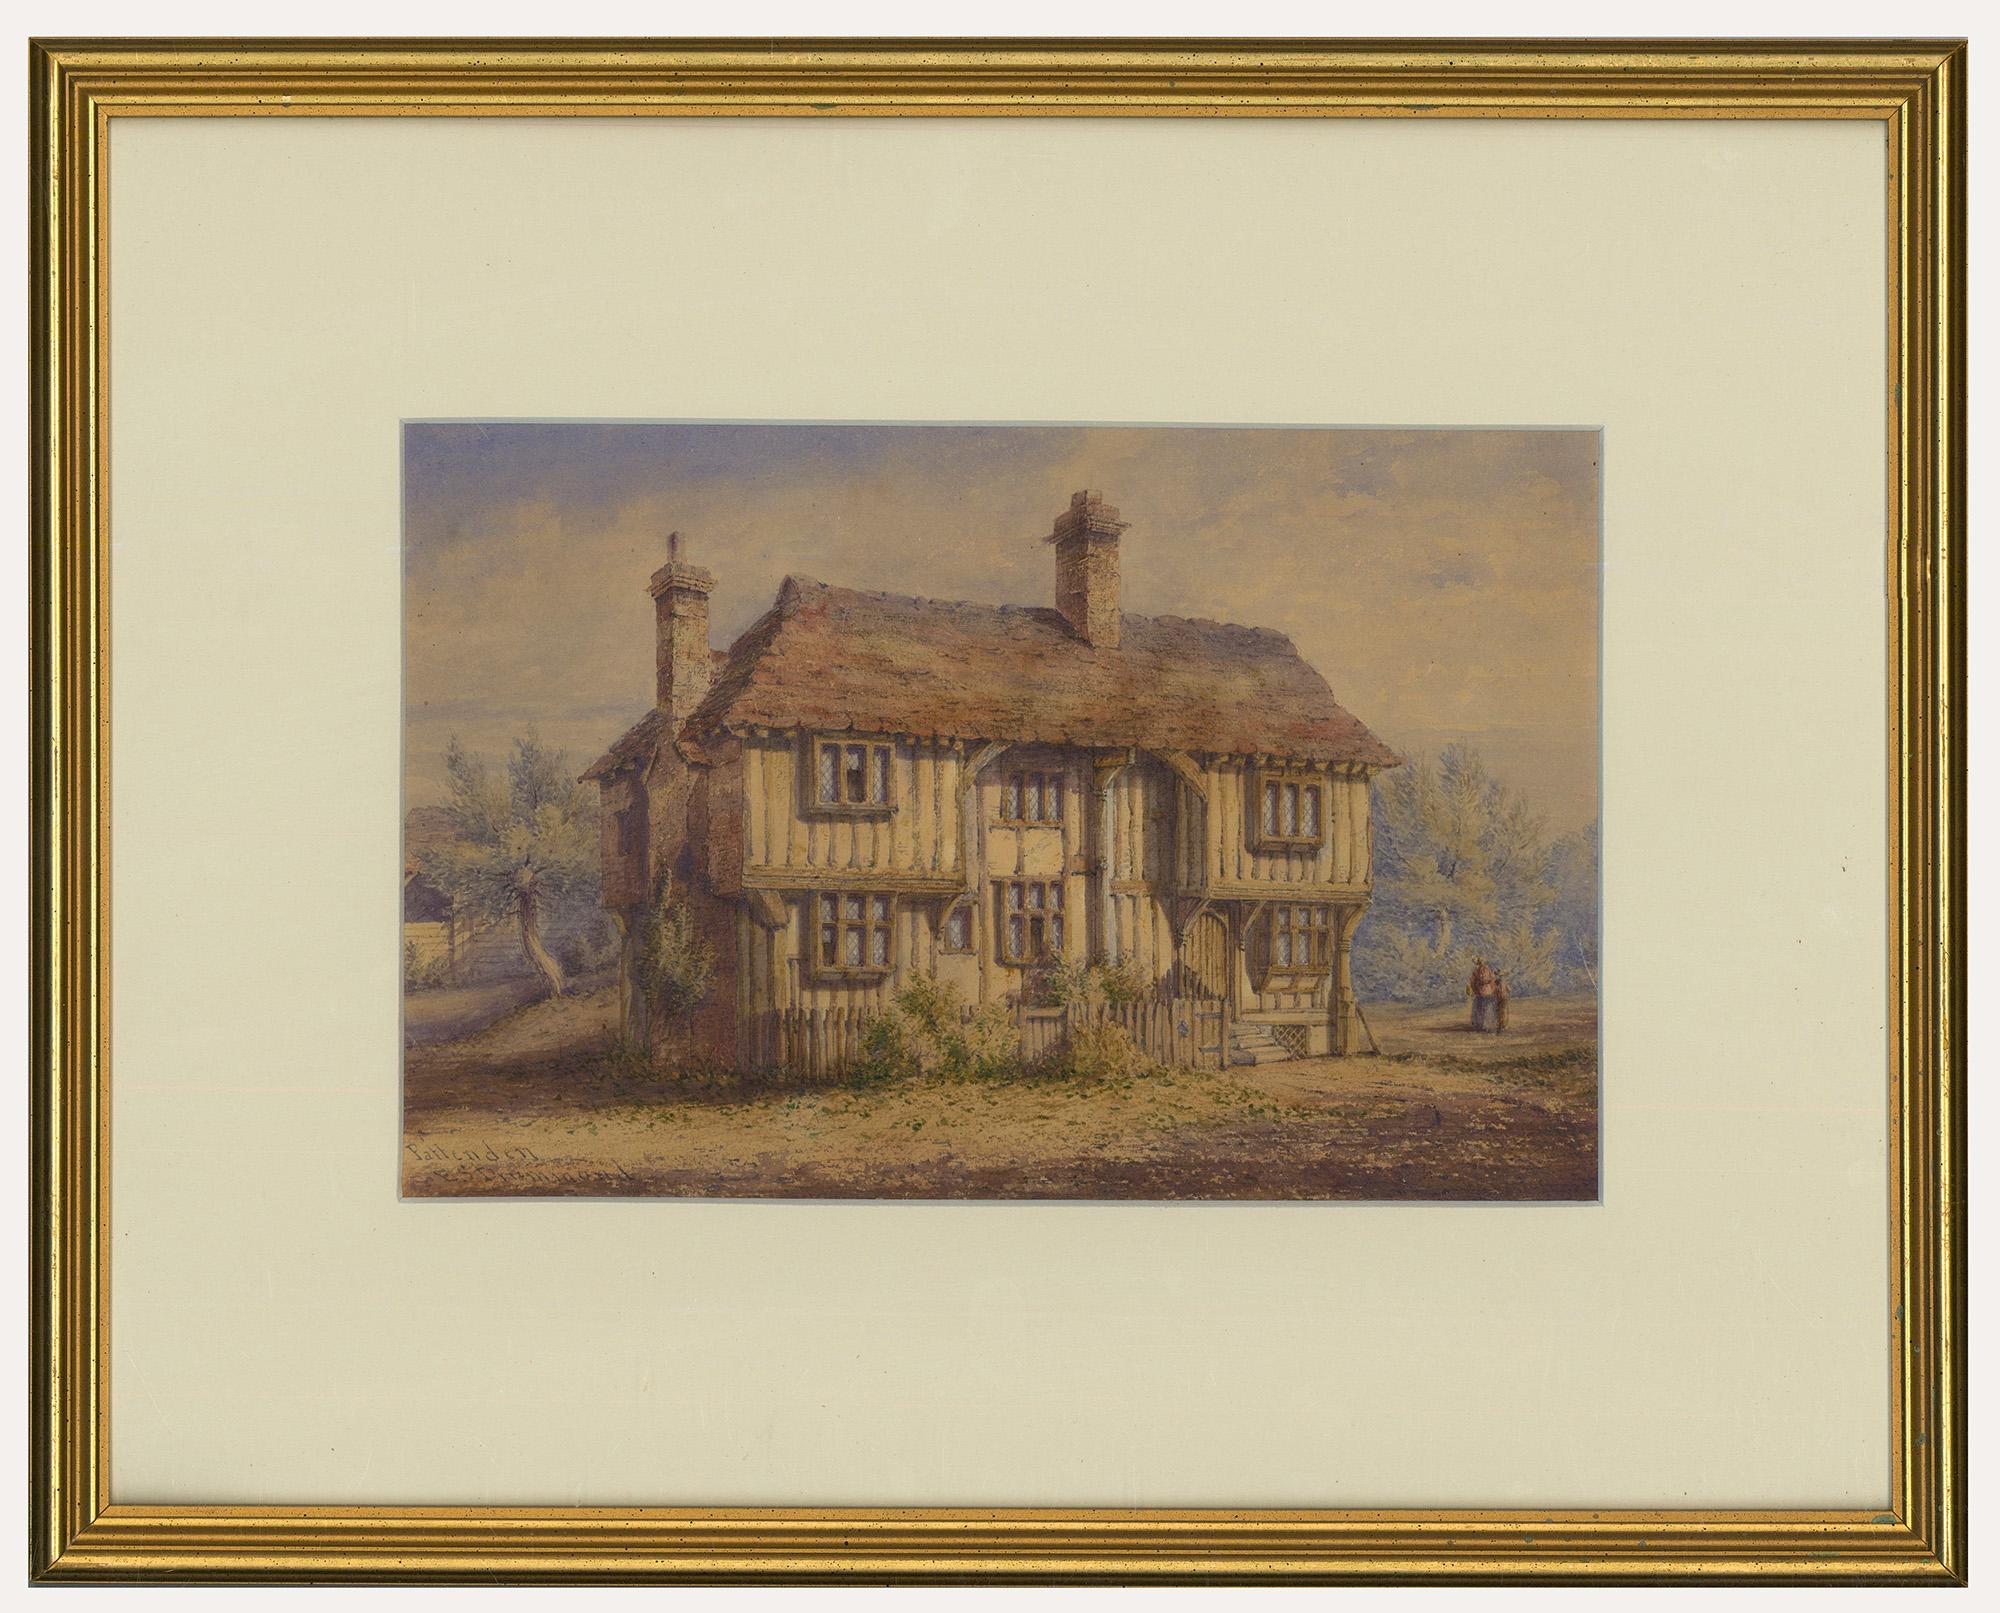 Unknown Landscape Art - E. S. Drummond - Framed 19th Century Watercolour, Timber House at Pattenden